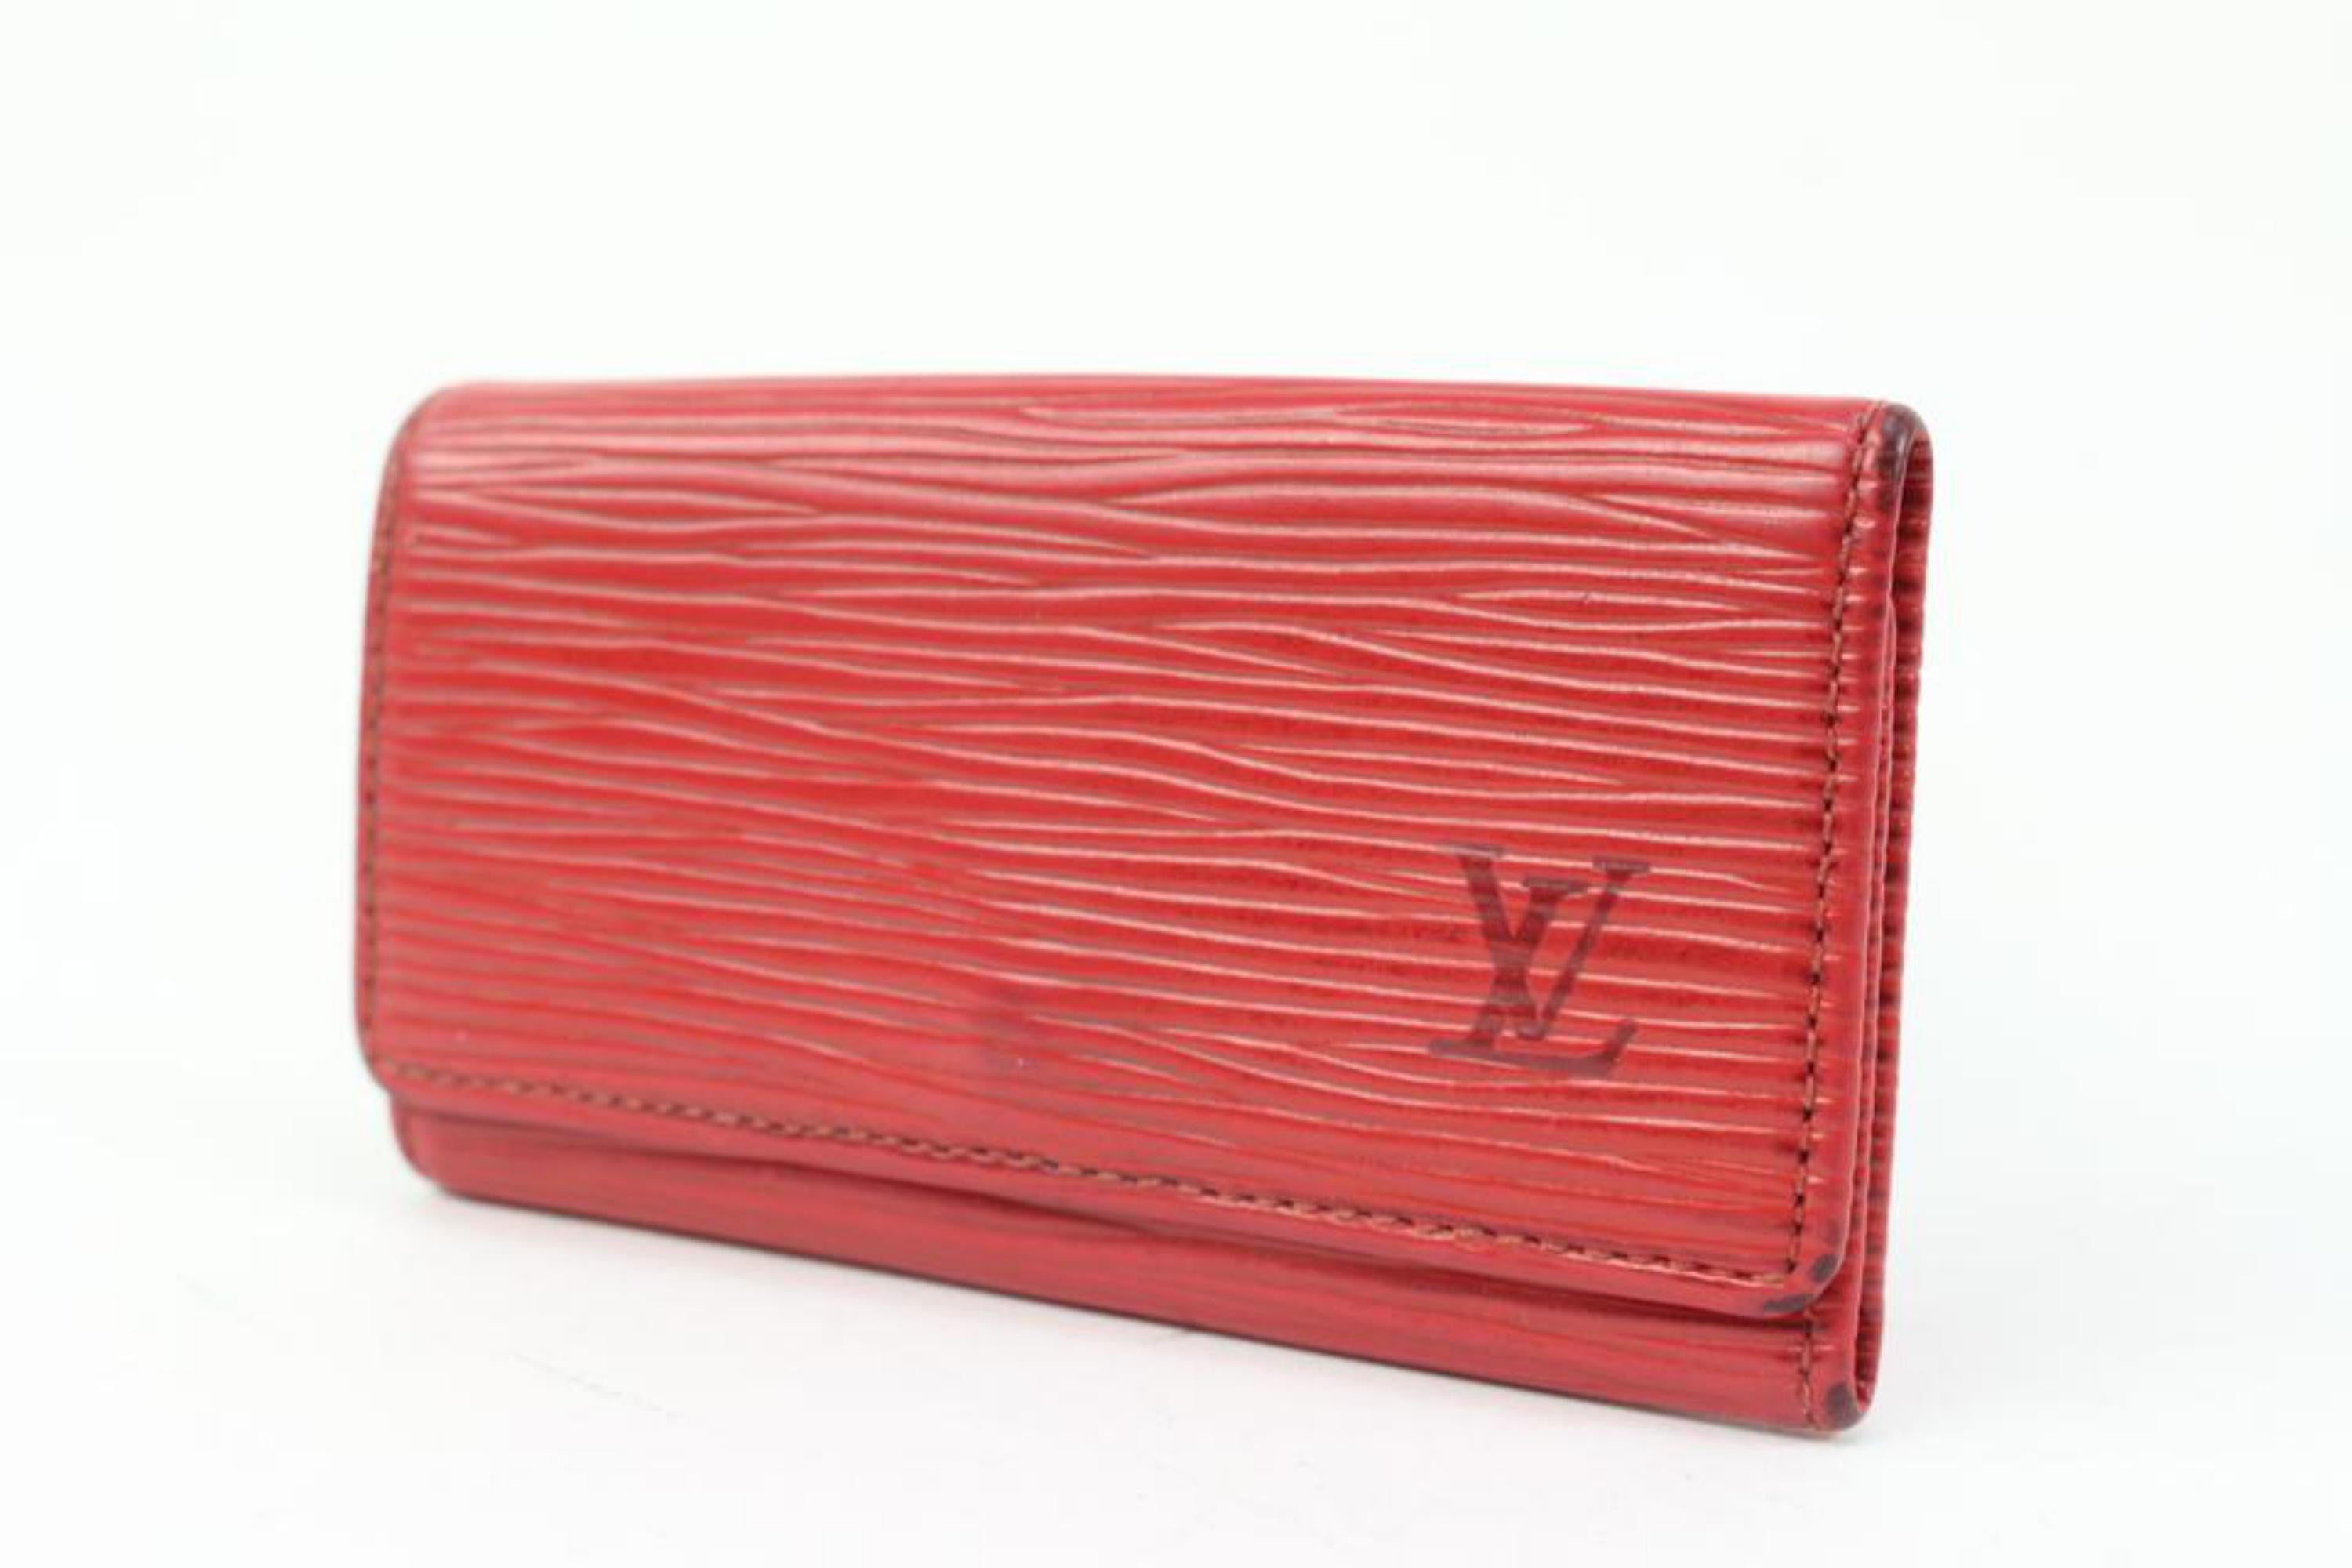 Louis Vuitton Red Epi Leather 4 Key Holder Multicles s330lk29
Date Code/Serial Number: CA0966
Made In: Spain
Measurements: Length:  4